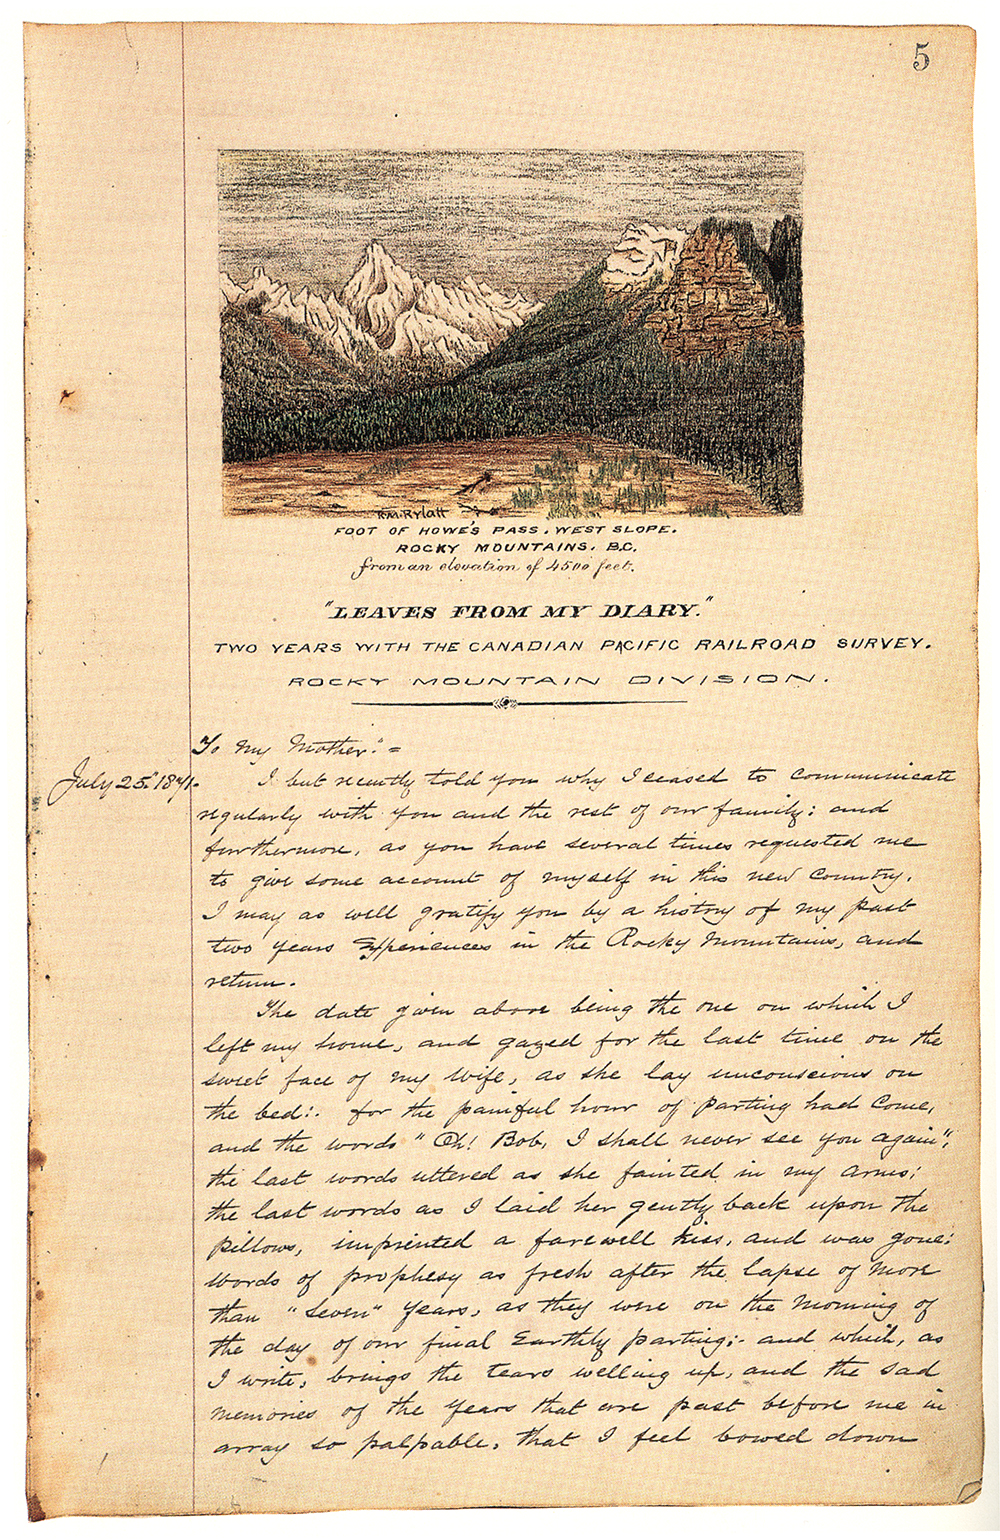 The first page of Robert M. Rylatt’s journal. The page consists of a hand drawn and coloured image of a mountain scene with handwritten text in black ink below it.